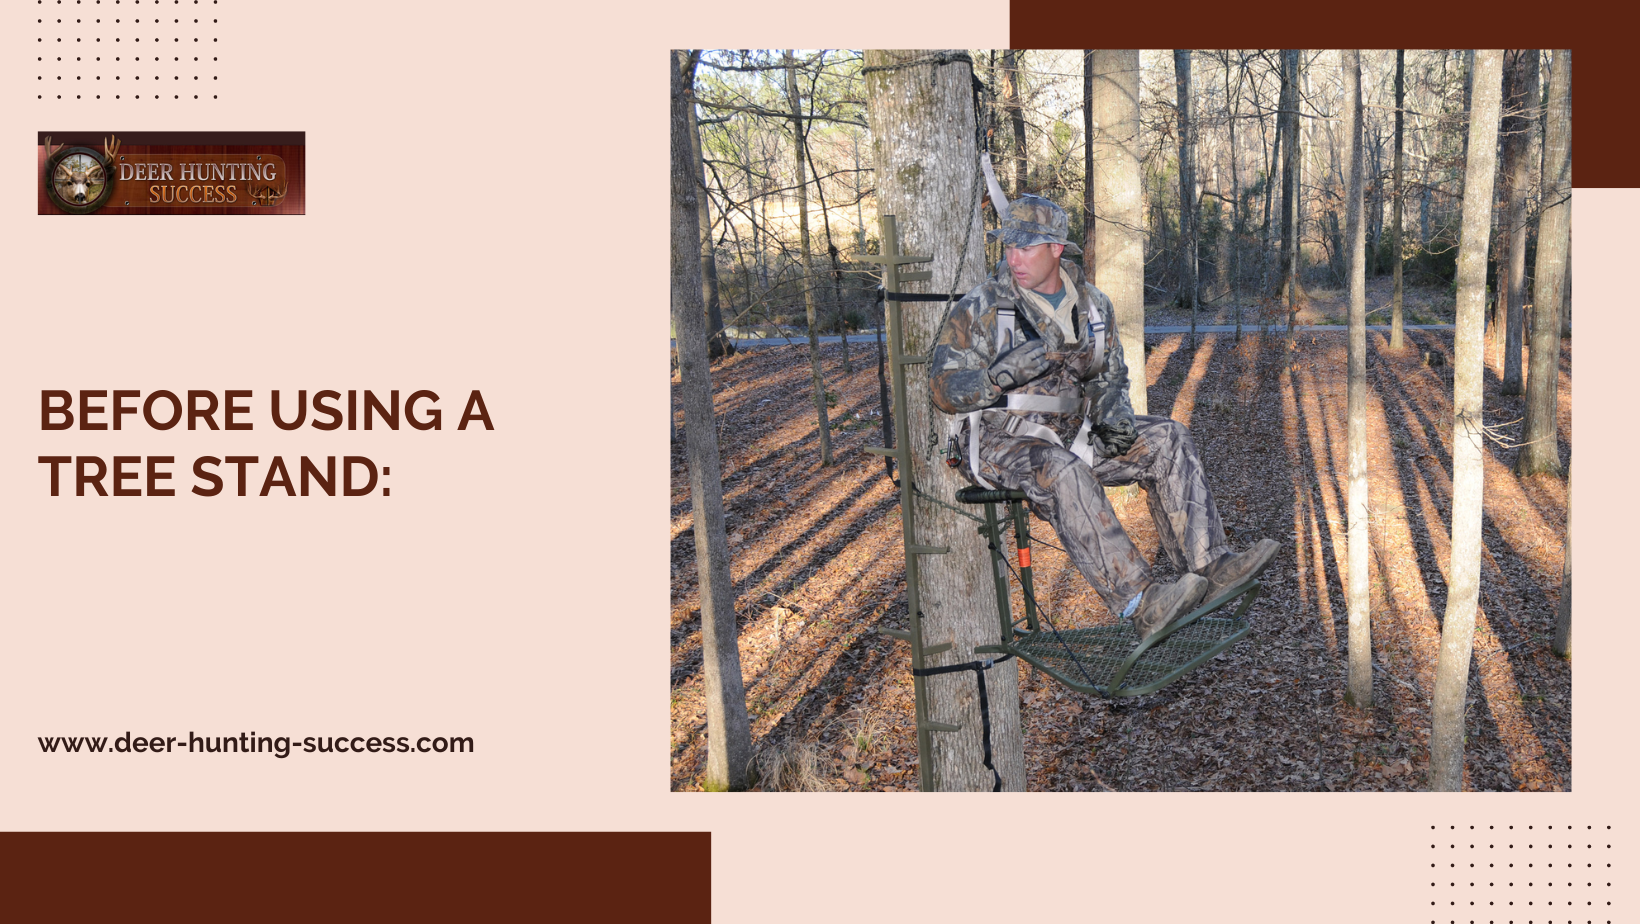 Faulty Tree Stands A Cause of Hunting Accidents